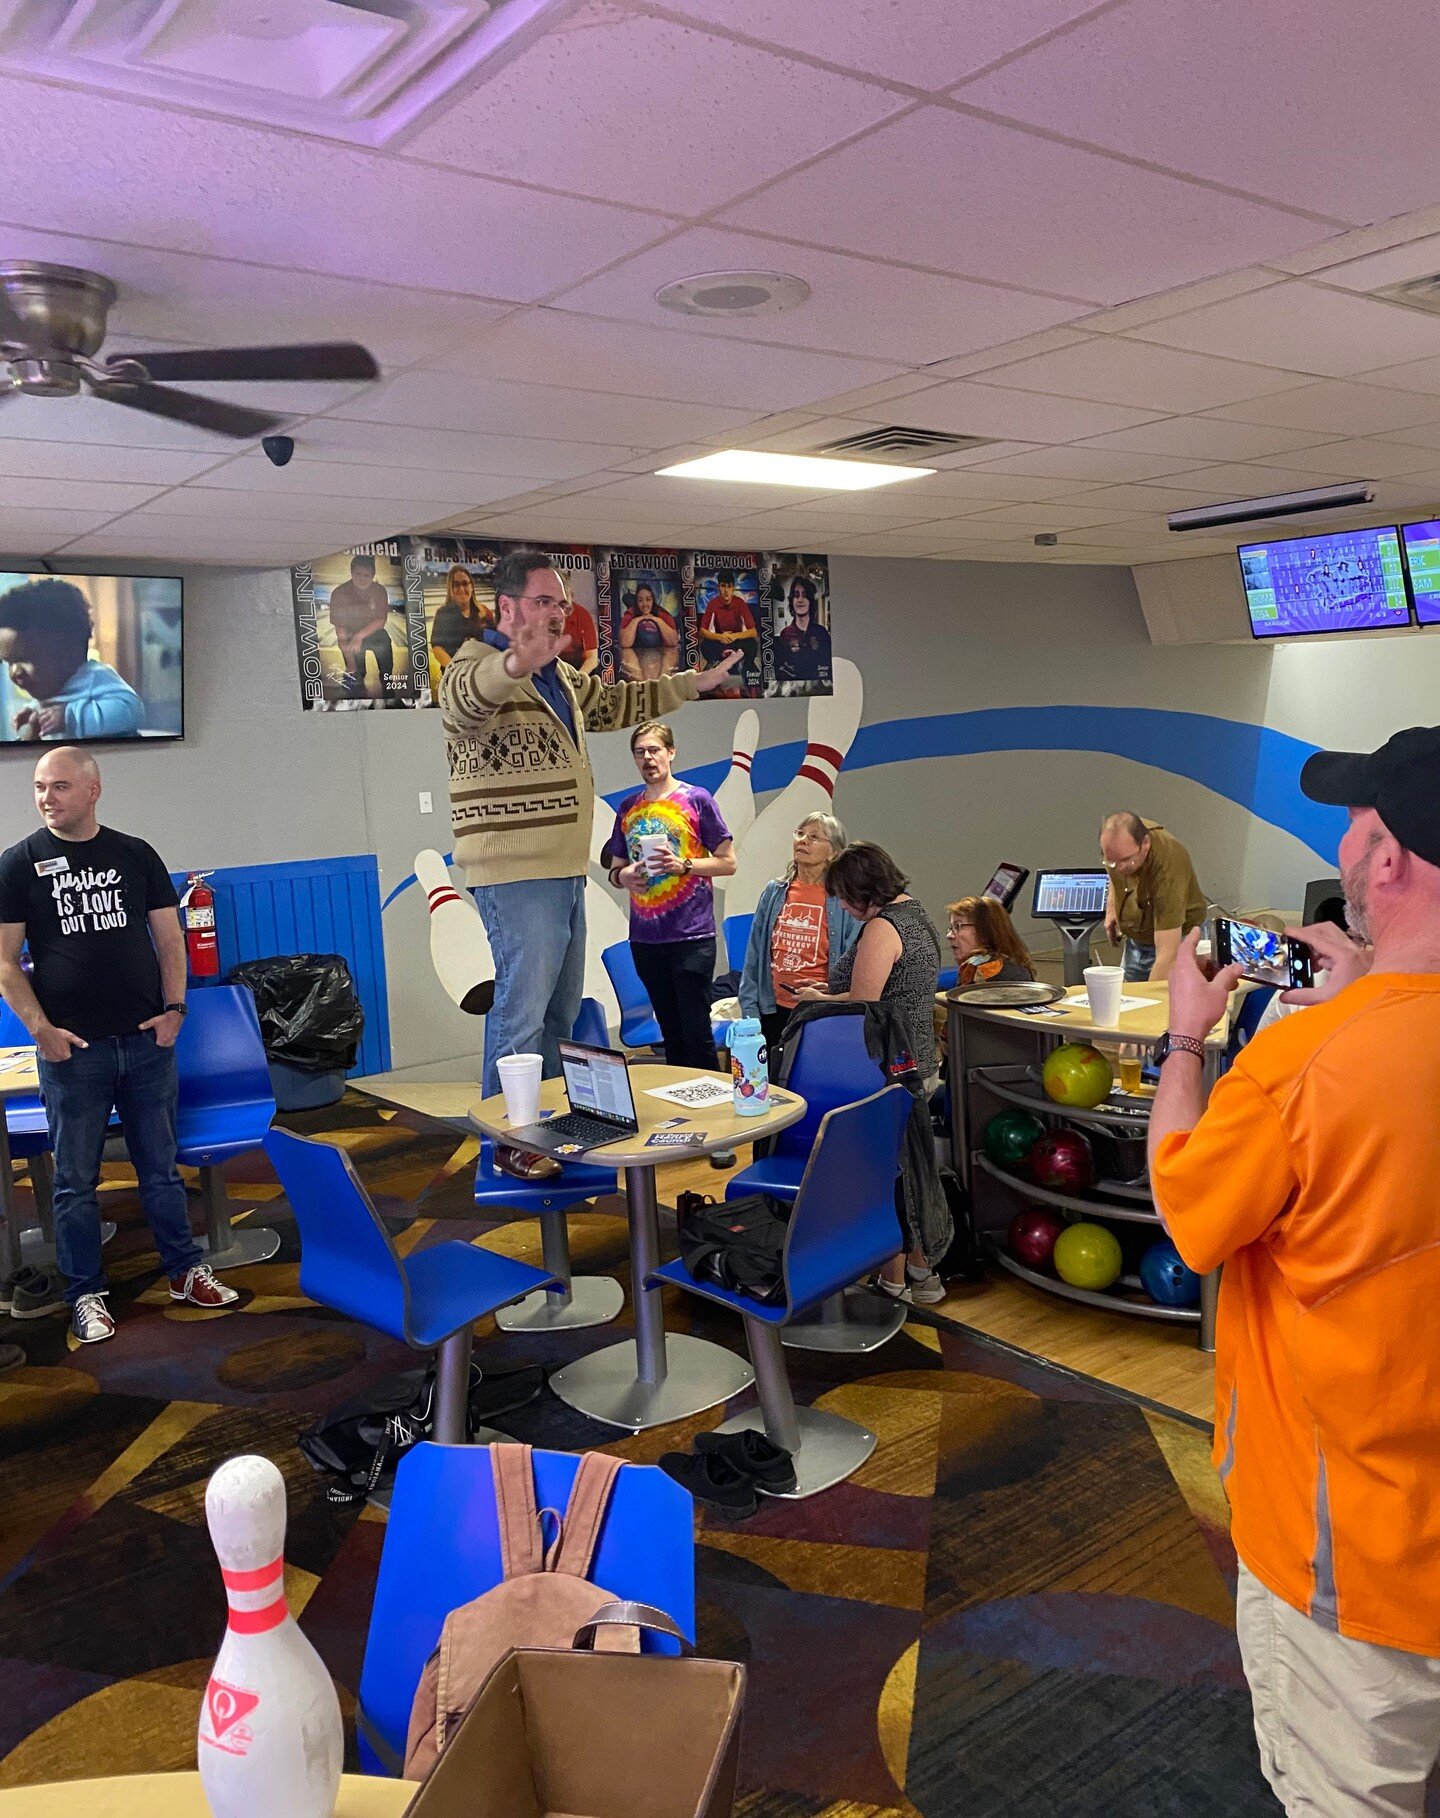 Last Saturday we celebrated the official launch of our campaign at Classic Lanes Bowling! Huge thank you to everyone who came out to have a conversation, bowl, or meet other members of the community!